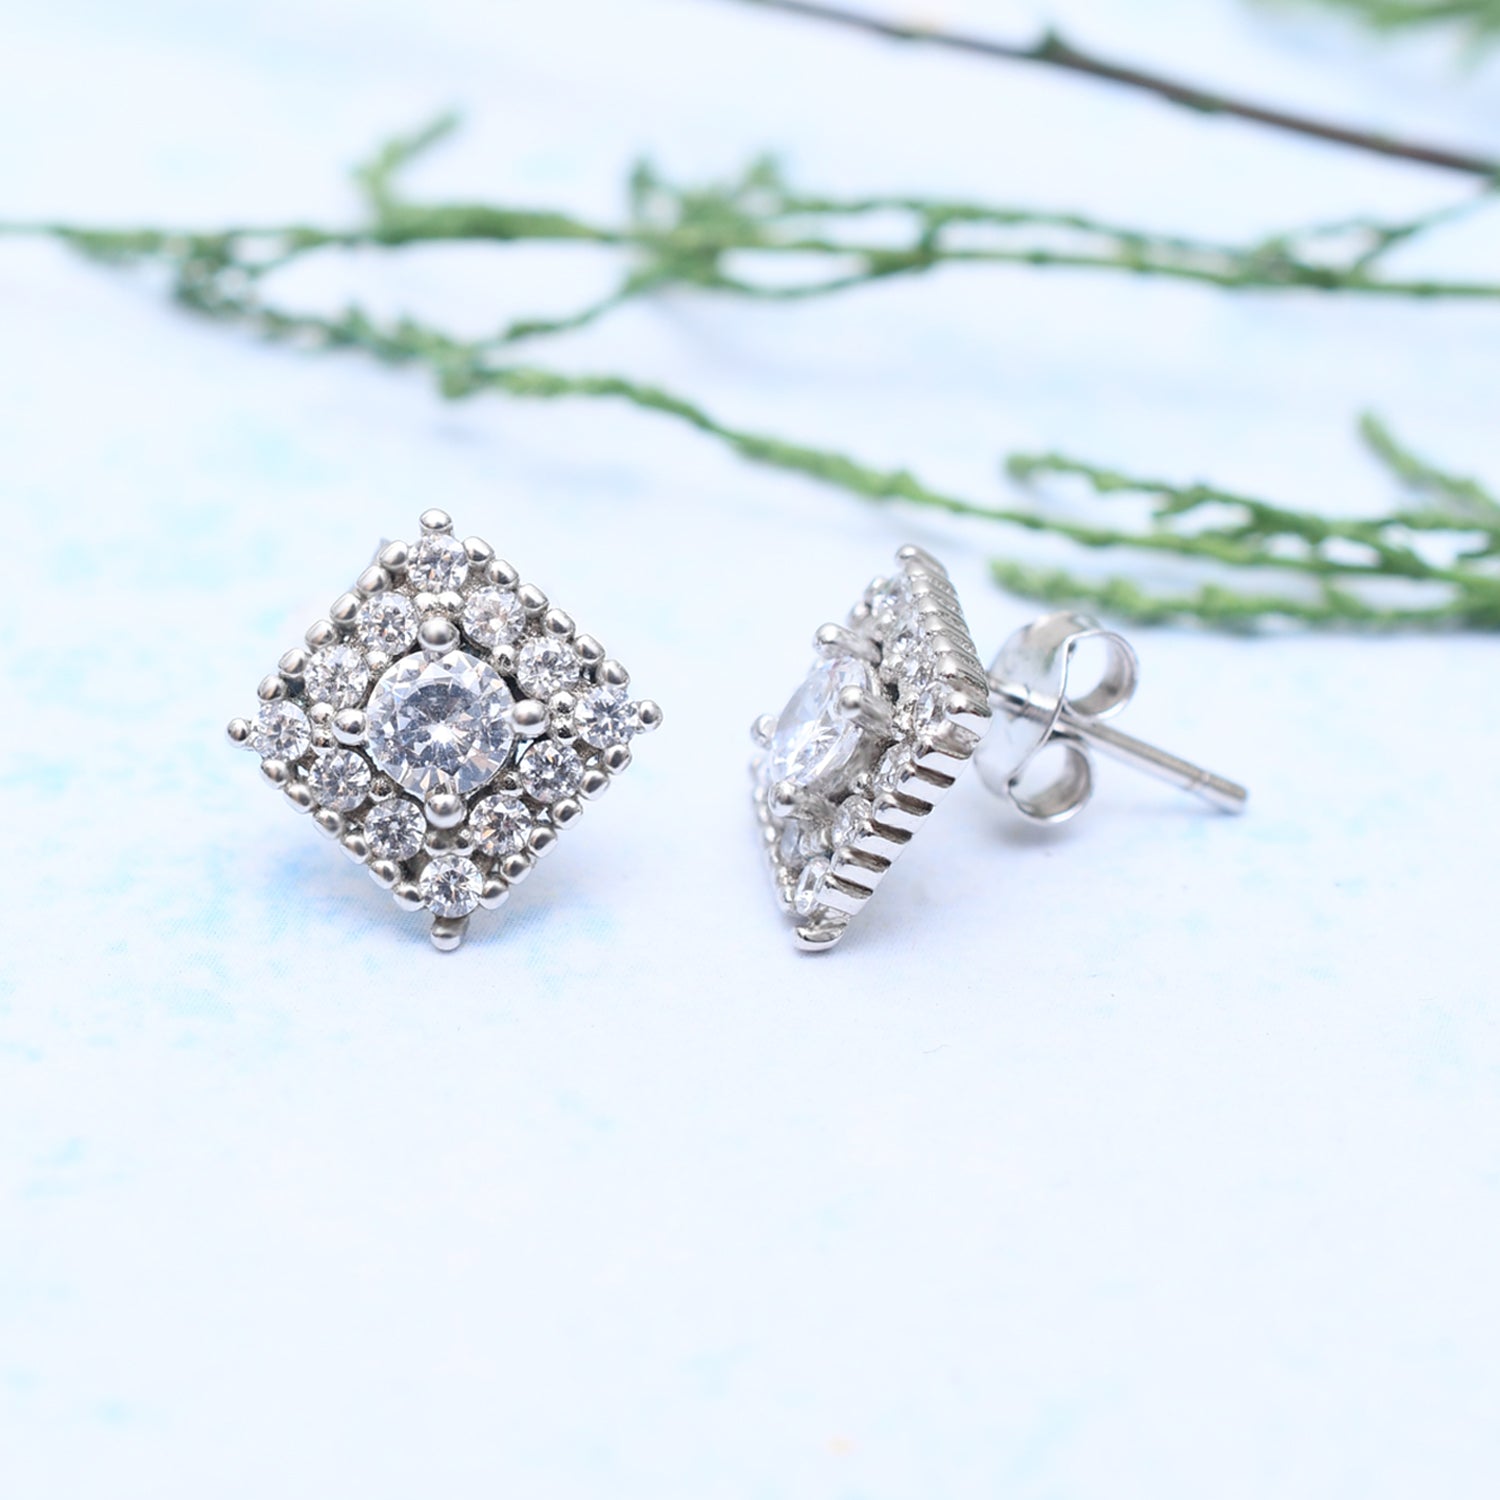 Silver Sparkling Intricate Squares Earrings